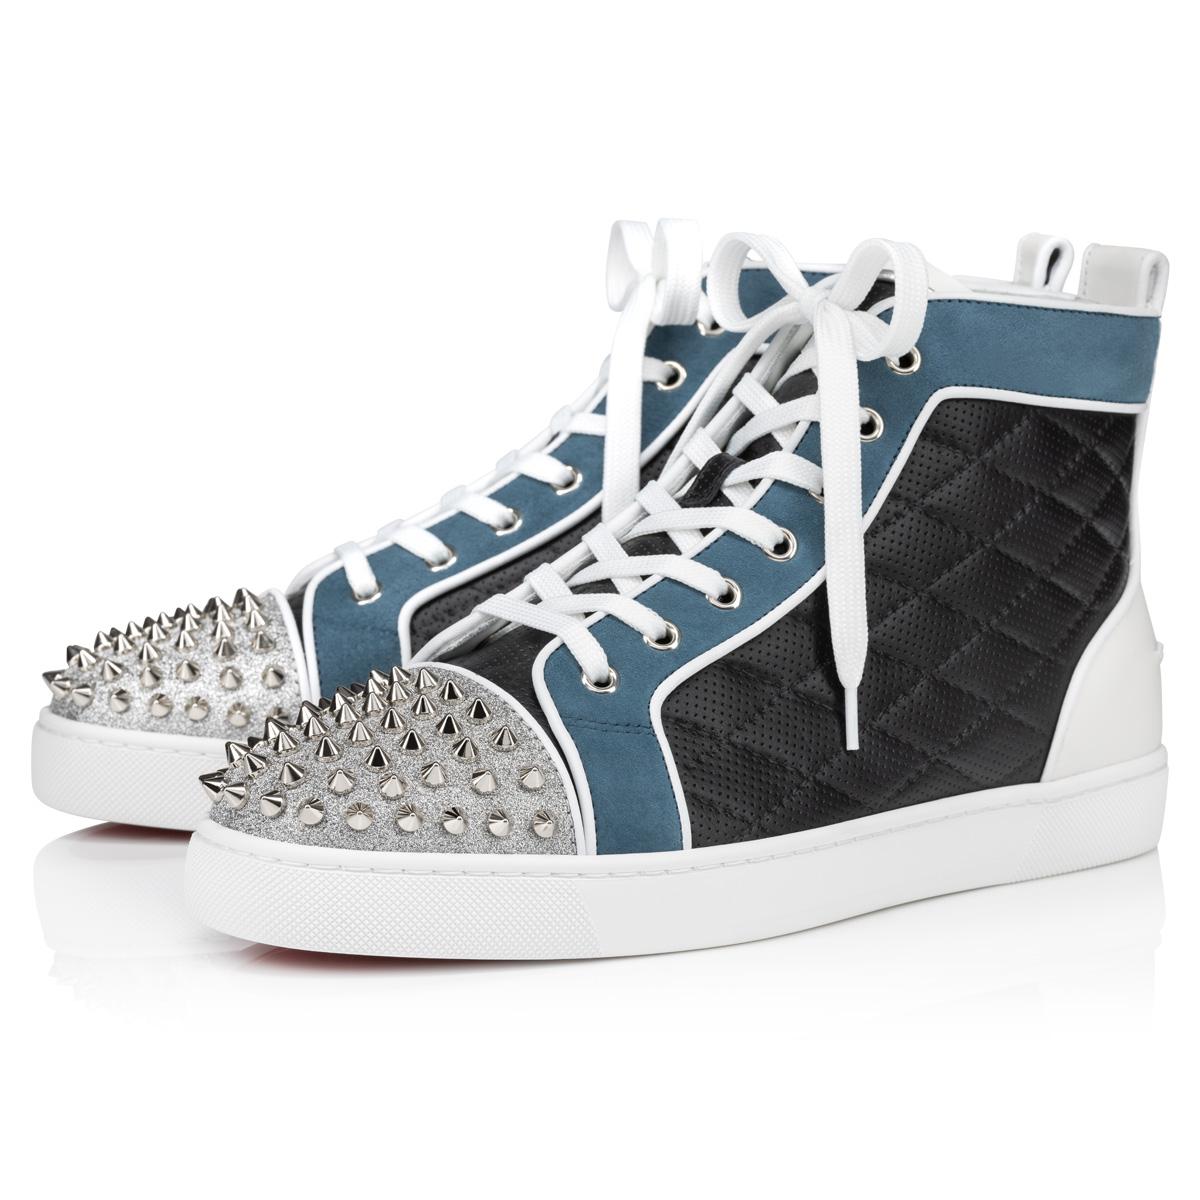 Christian Louboutin Silver Leather Louis Spikes High-Top Sneakers Size 44  Christian Louboutin